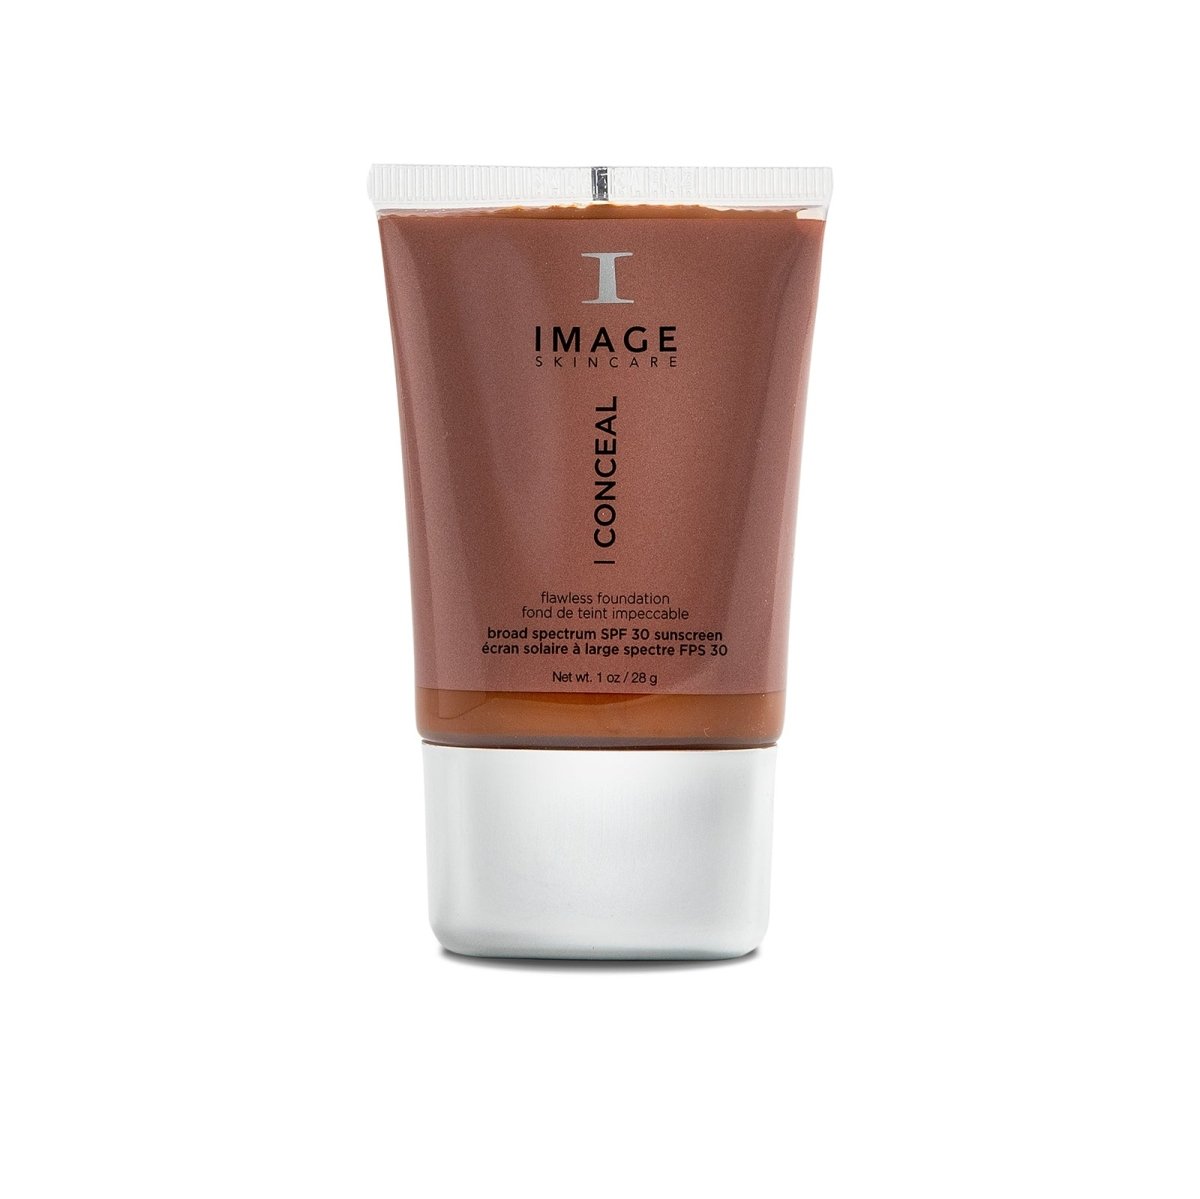 IMAGE Skincare I CONCEAL Flawless Foundation SPF 30 - SkincareEssentials